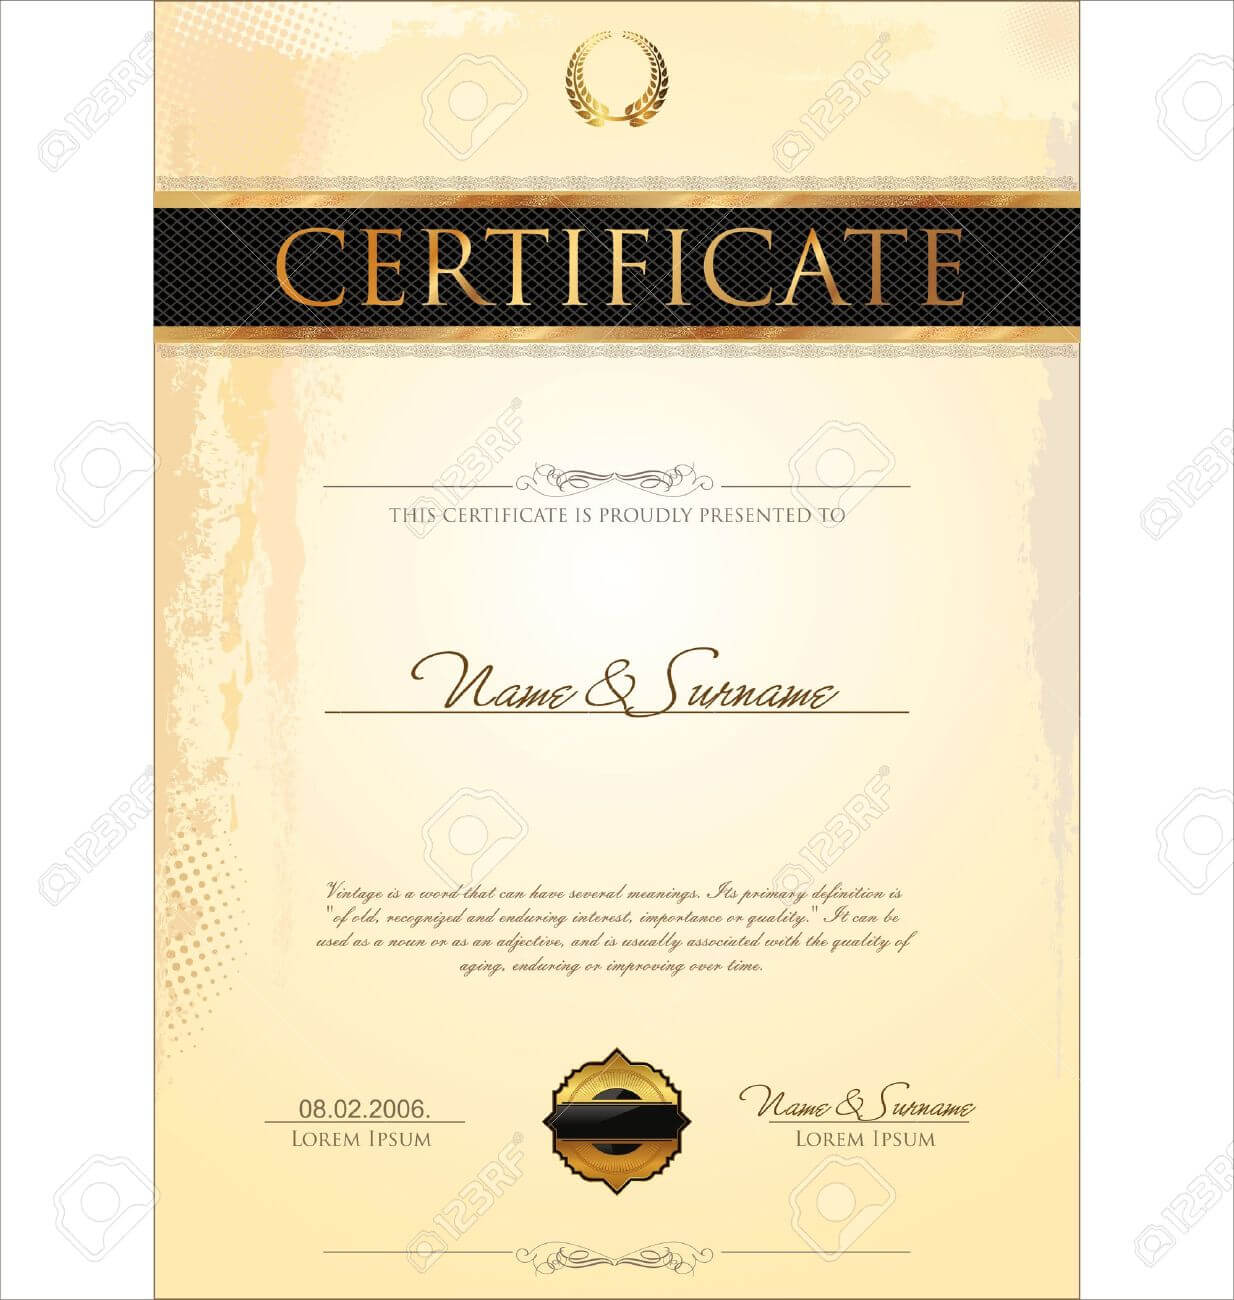 Certificate Template Throughout Free Stock Certificate Template Download